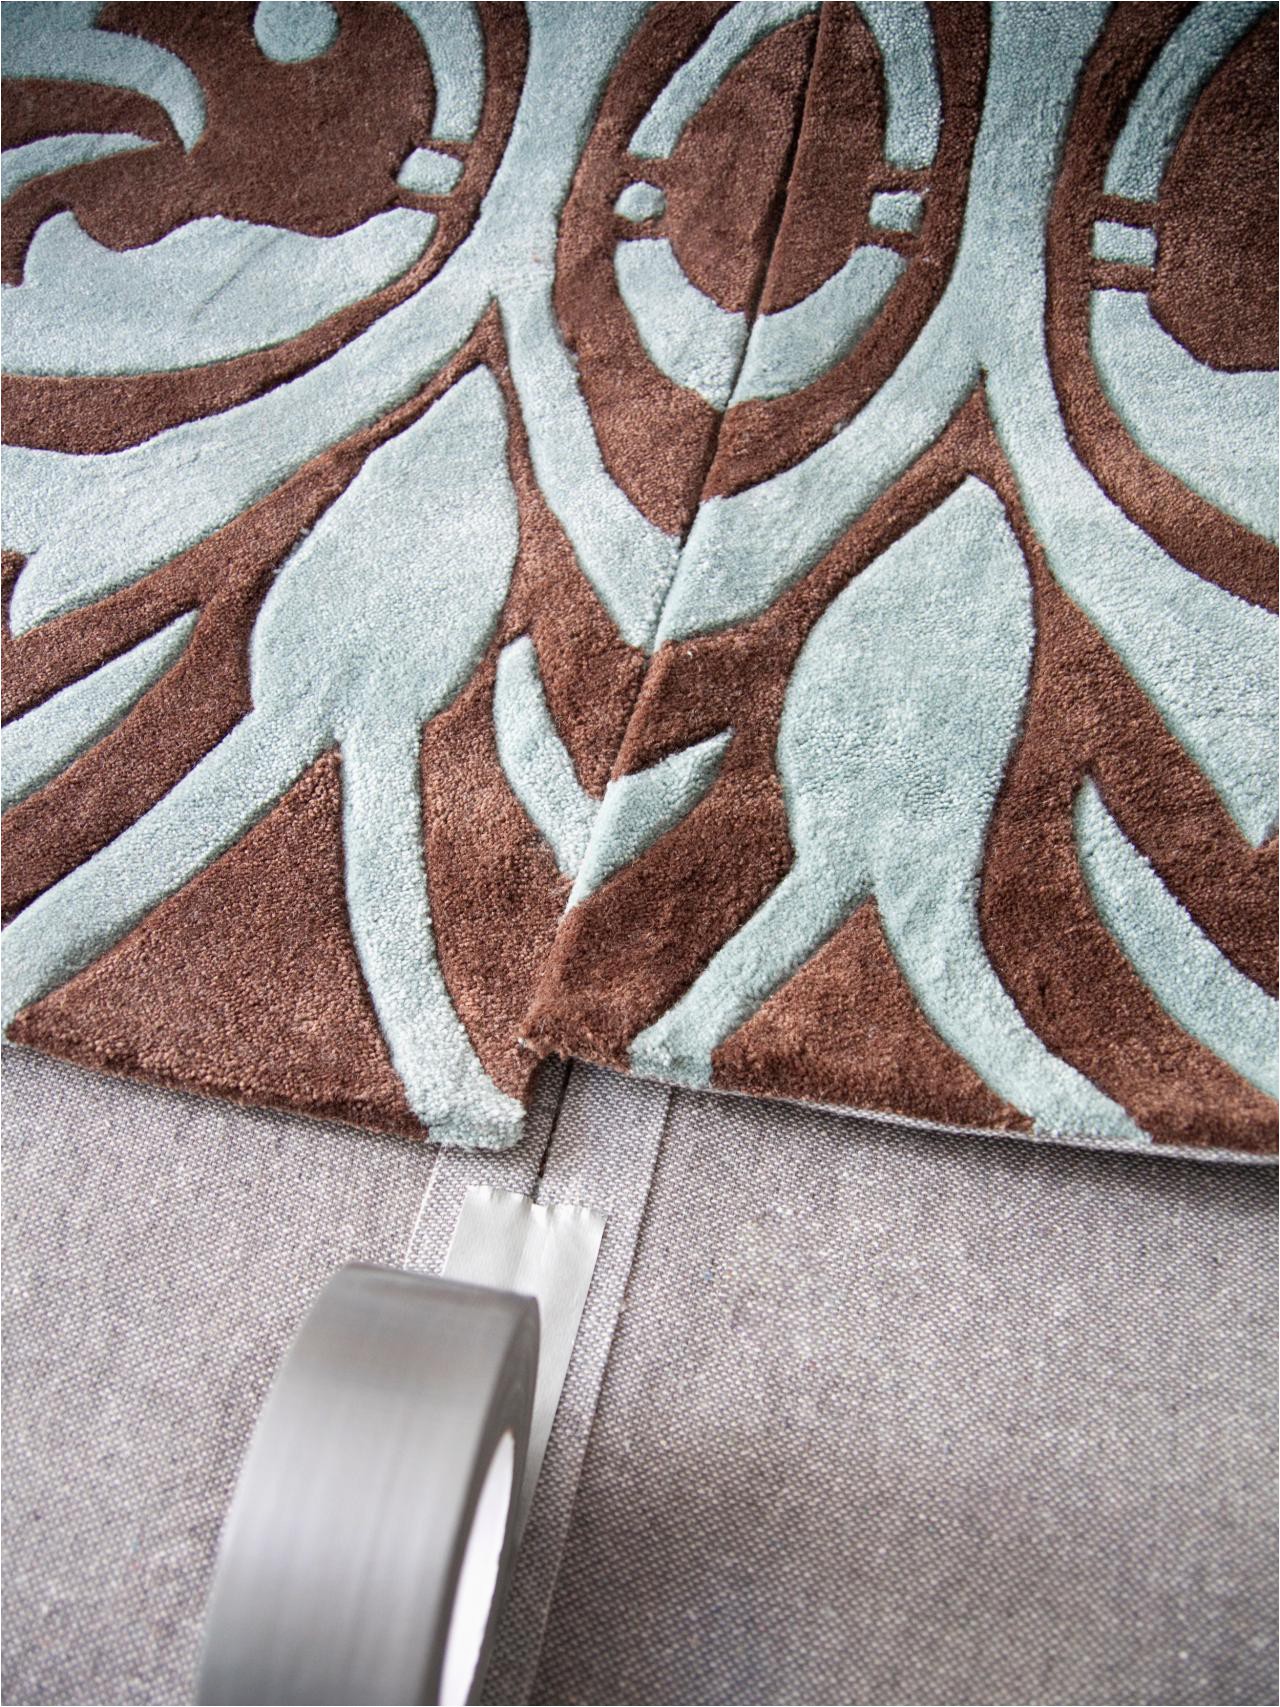 Carpet Tape for area Rugs How to Make E Custom area Rug From Several Small